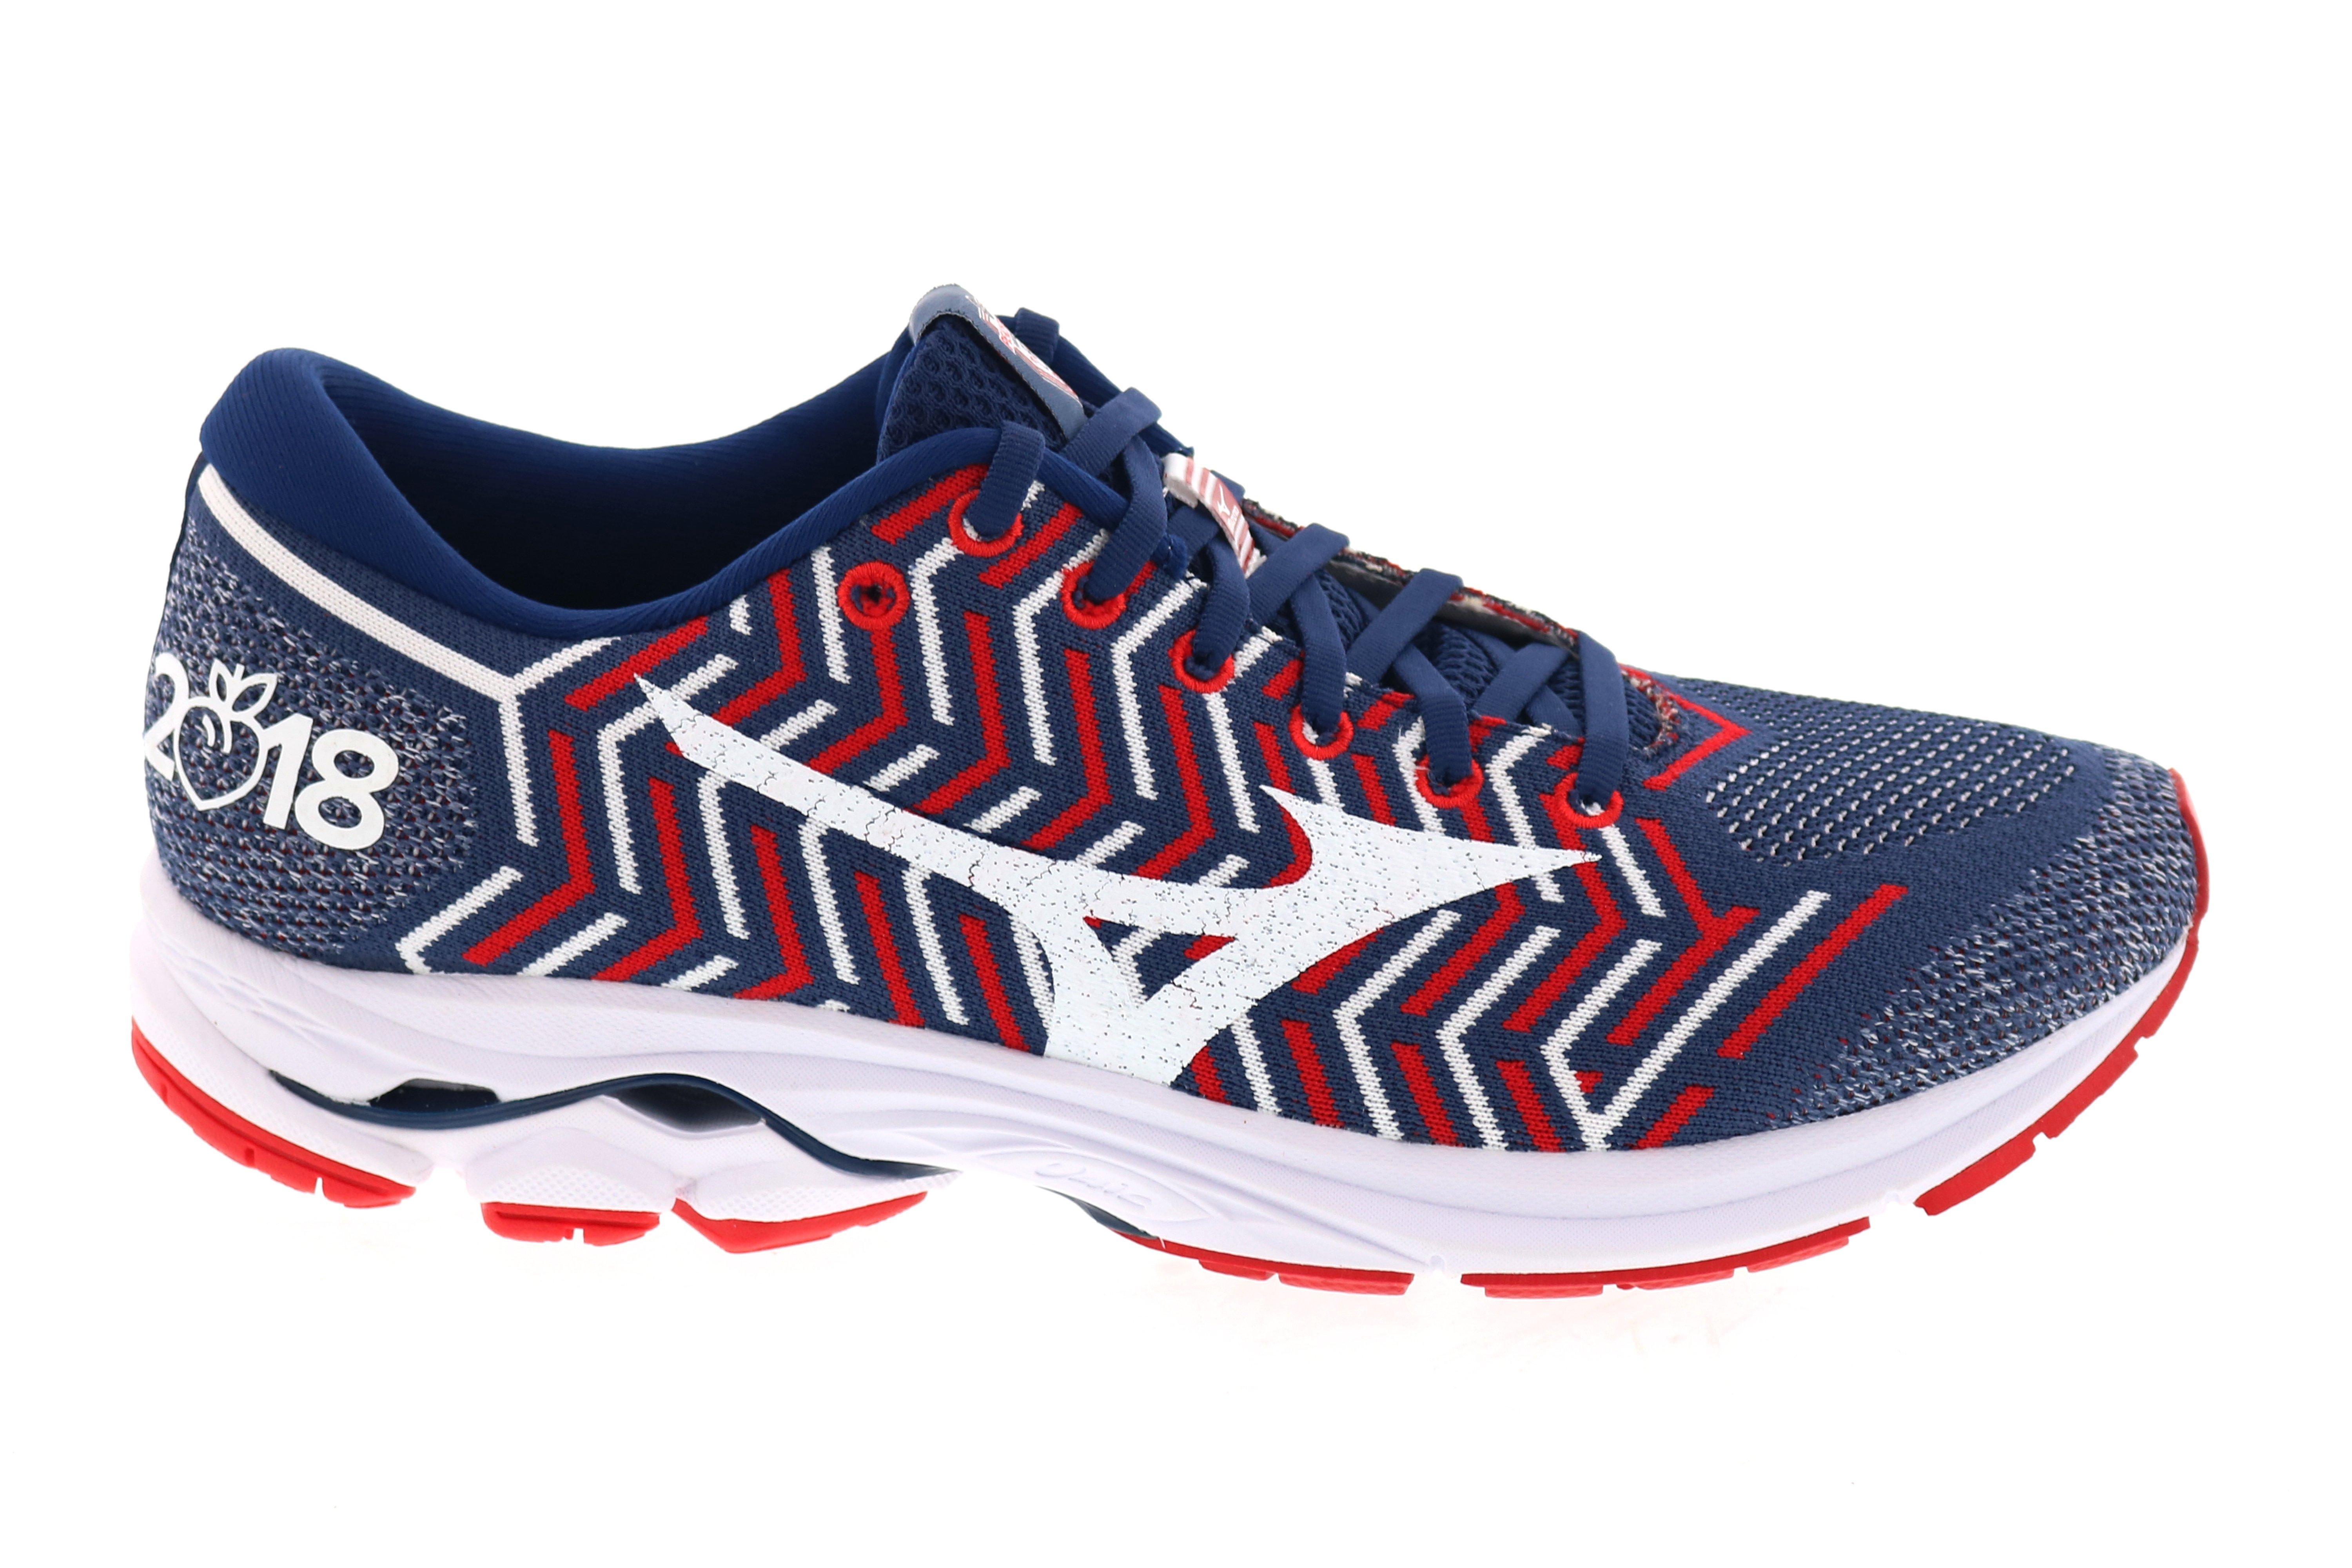 peachtree road race shoes 2019